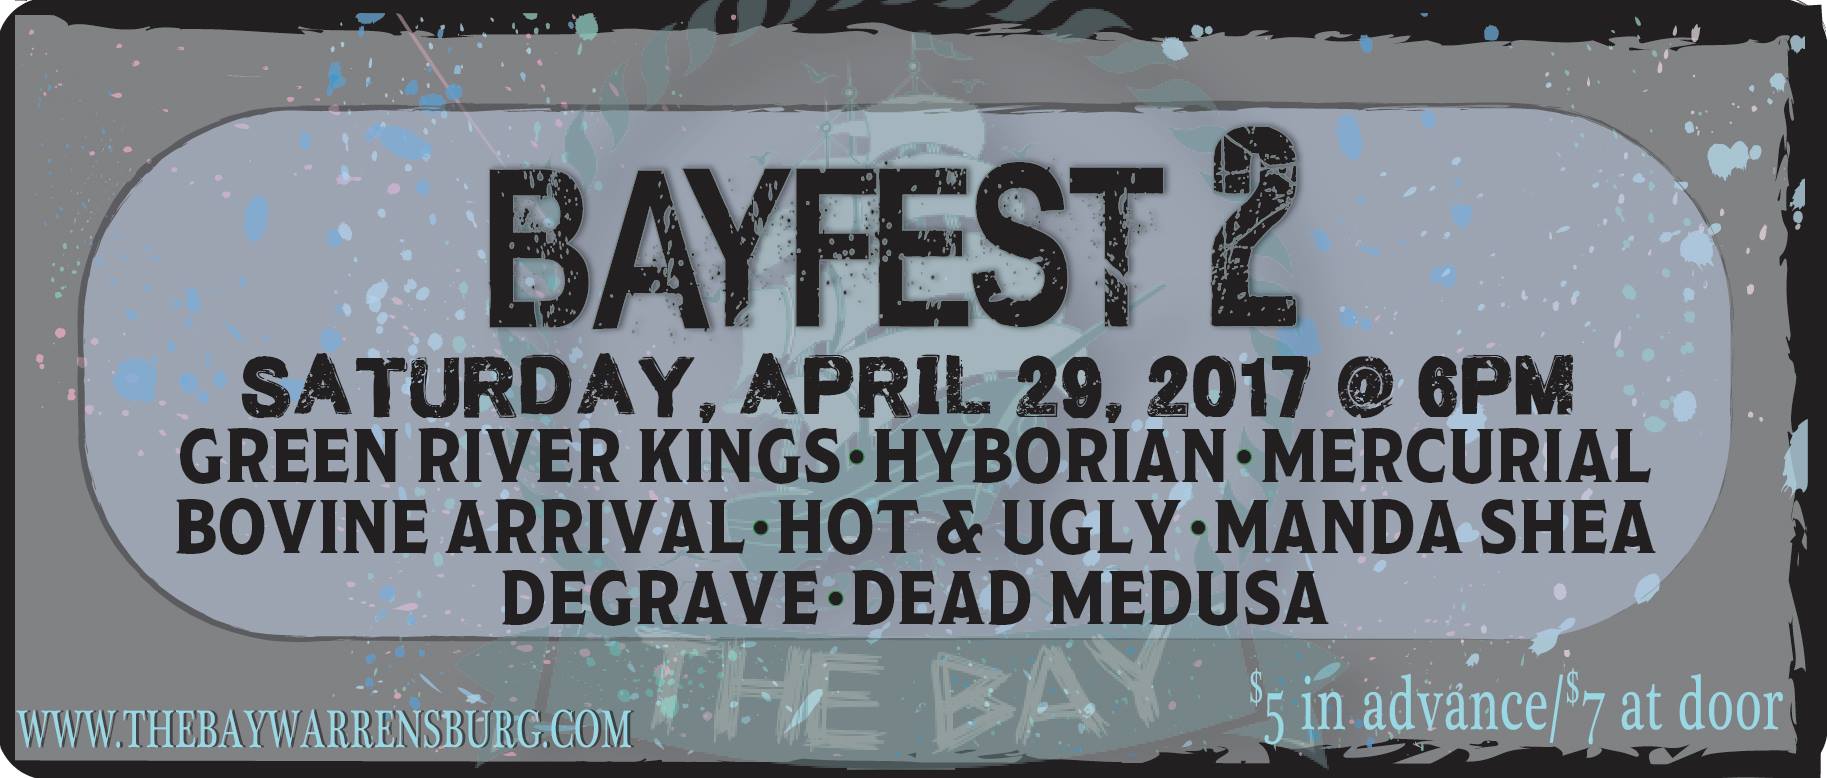 Bayfest returns with something for everyone